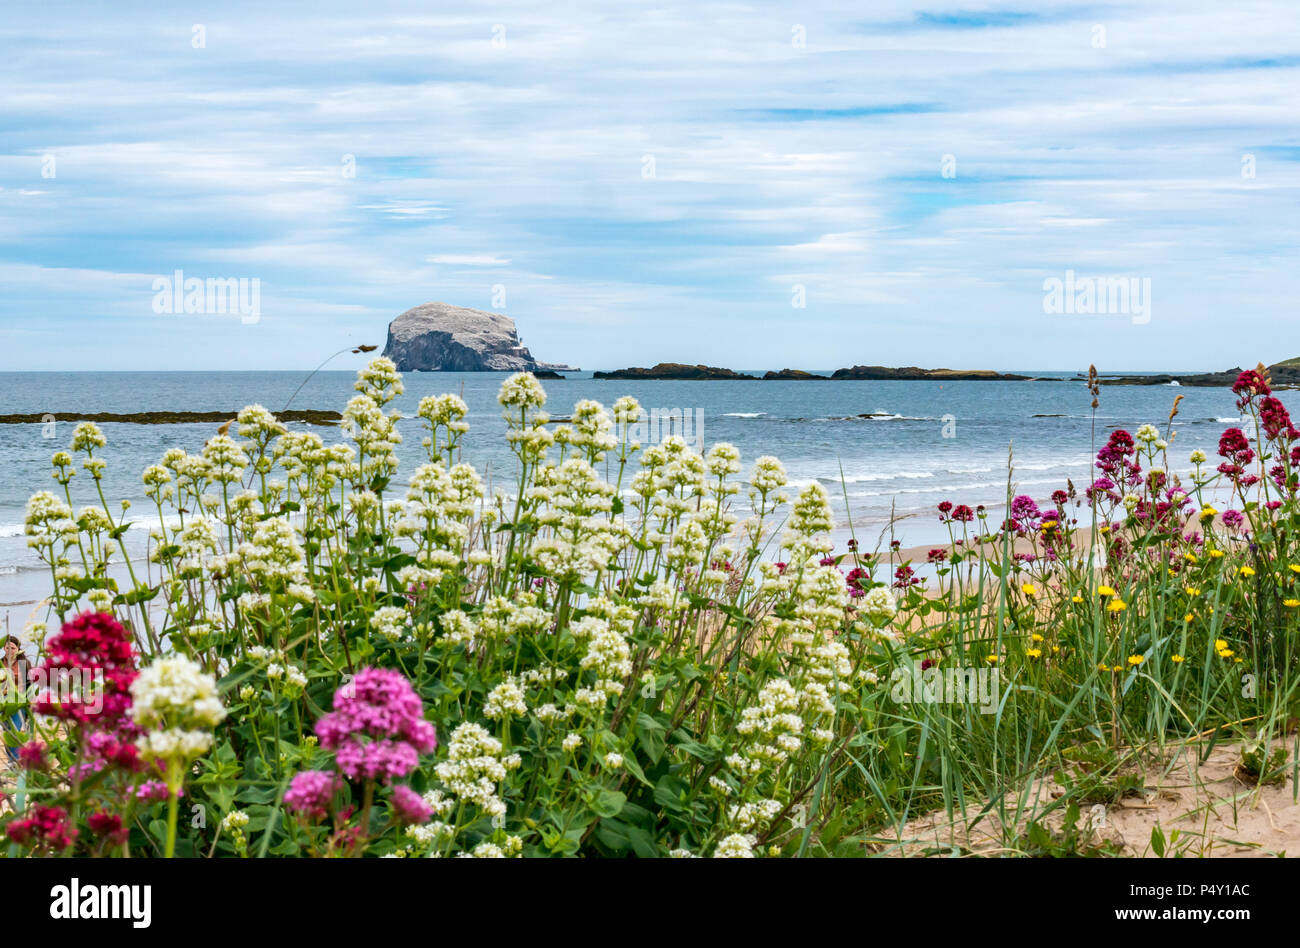 Bass Rock white with nesting gannets, largest Northern gannet colony, Morus bassanus, with Centranthus ruber wildflowers, North Berwick, Scotland, UK Stock Photo